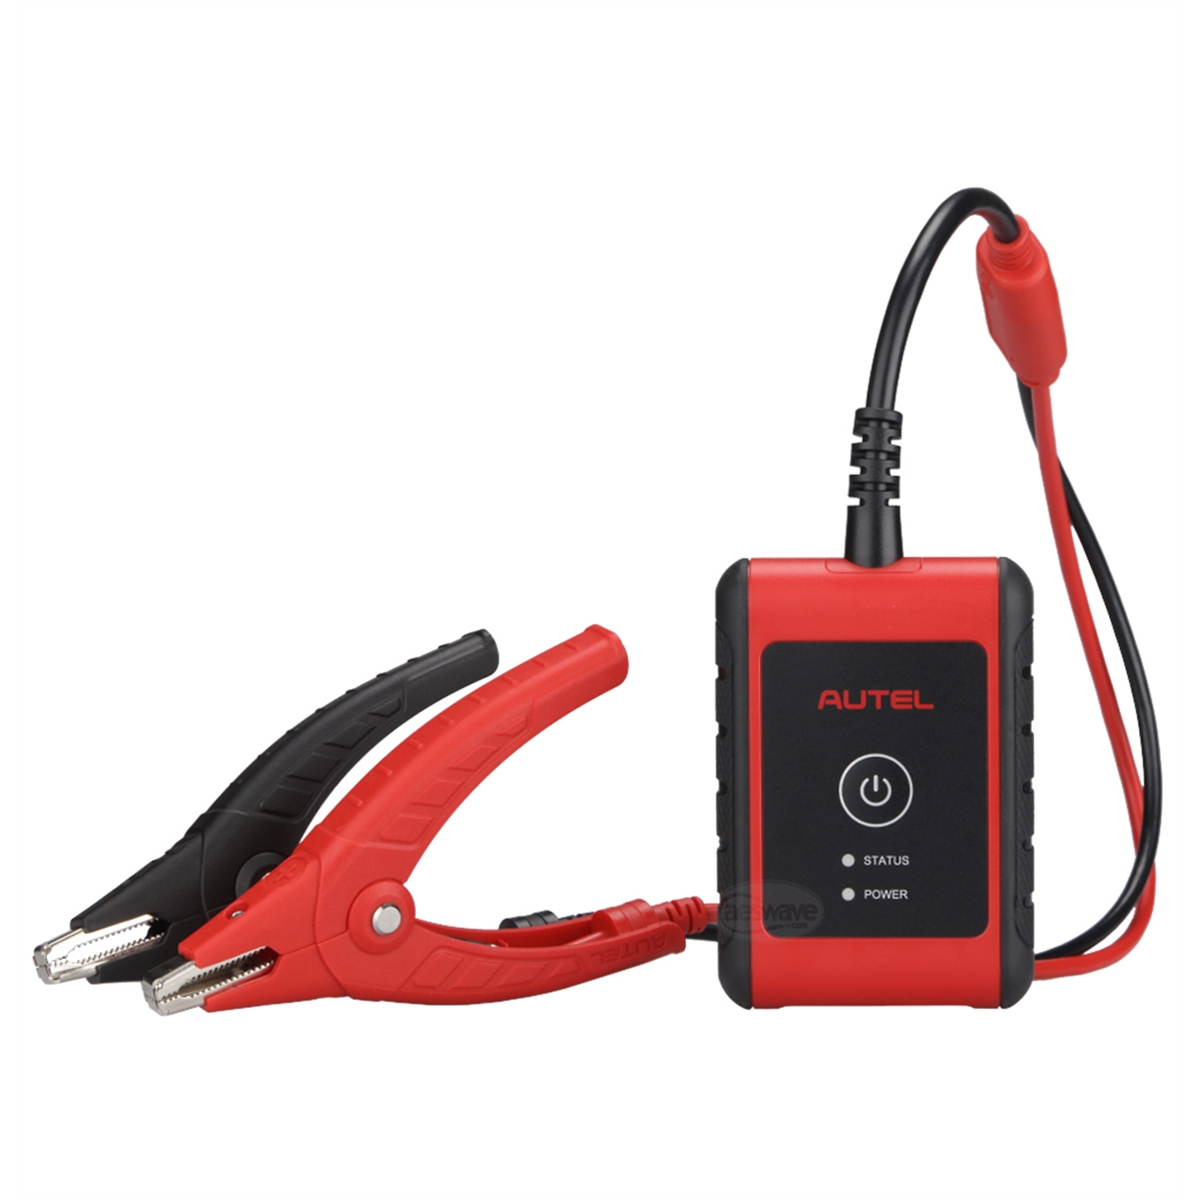 Picture of Autel AULBT506 BT506 Battery & Electrical Analysis Tool & App for iOS & Android